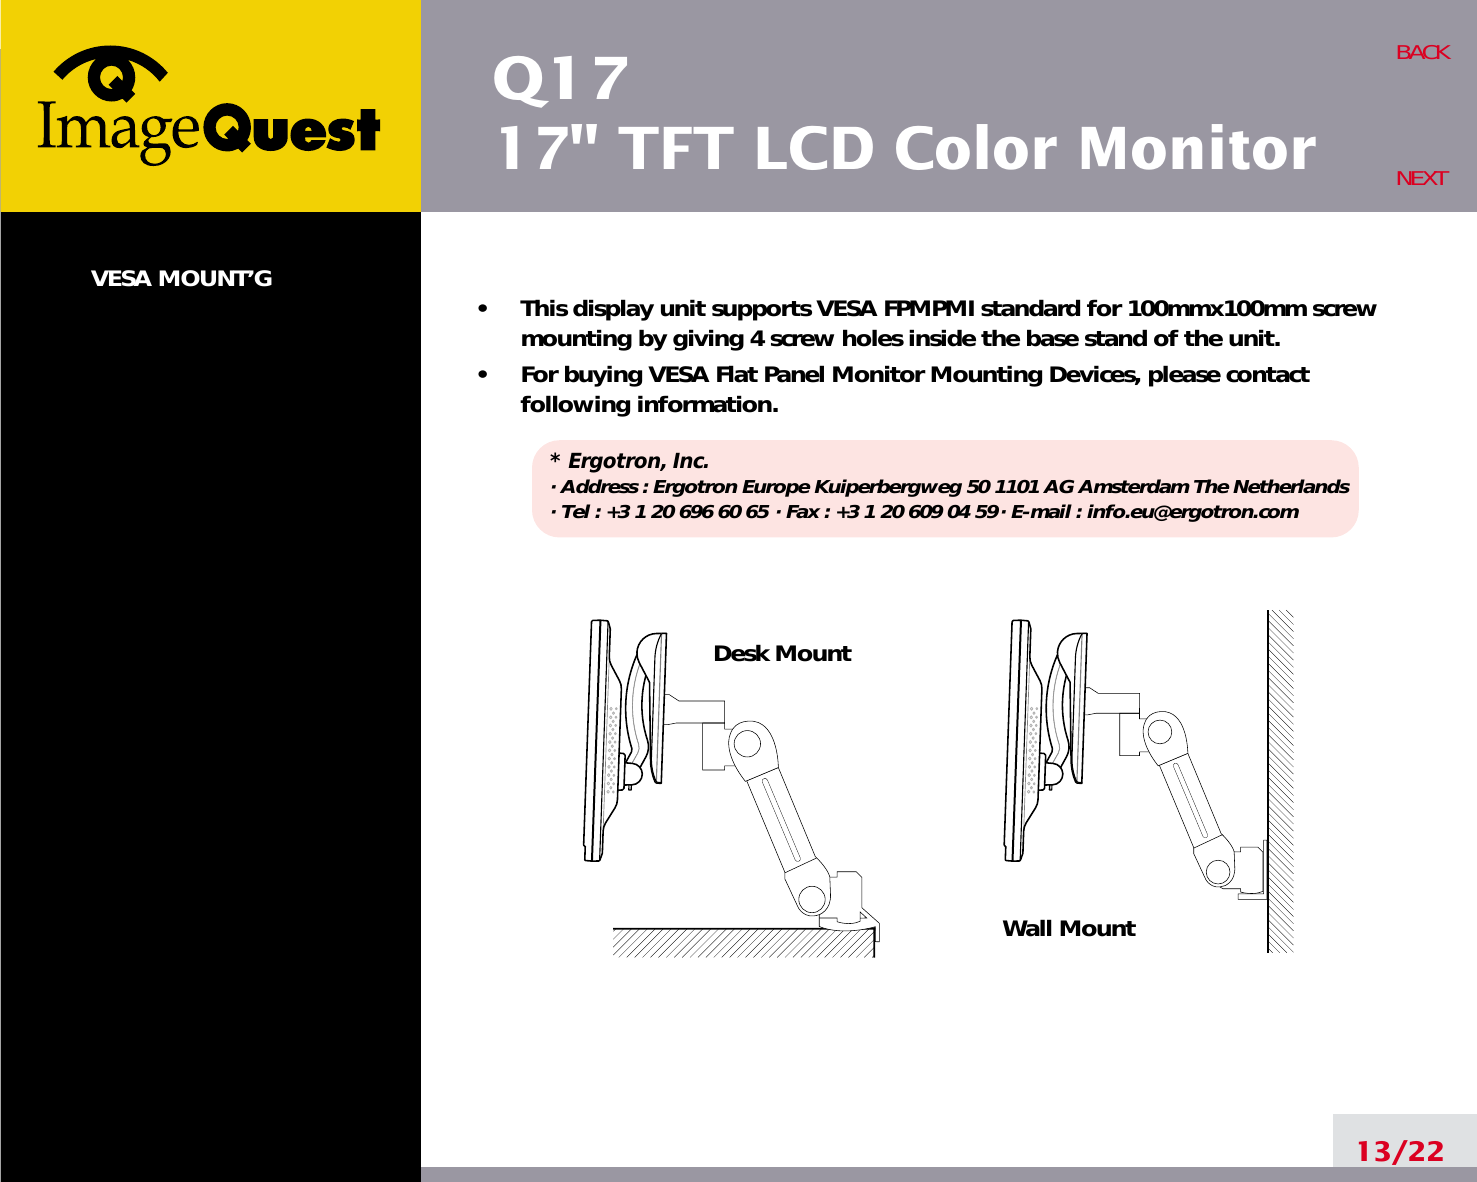 Q1717&quot; TFT LCD Color MonitorVESA MOUNT’G•     This display unit supports VESA FPMPMI standard for 100mmx100mm screwmounting by giving 4 screw holes inside the base stand of the unit.•     For buying VESA Flat Panel Monitor Mounting Devices, please contactfollowing information.* Ergotron, Inc.· Address : Ergotron Europe Kuiperbergweg 50 1101 AG Amsterdam The Netherlands· Tel : +3 1 20 696 60 65 · Fax : +3 1 20 609 04 59· E-mail : info.eu@ergotron.com13/22BACKNEXTDesk MountWall Mount